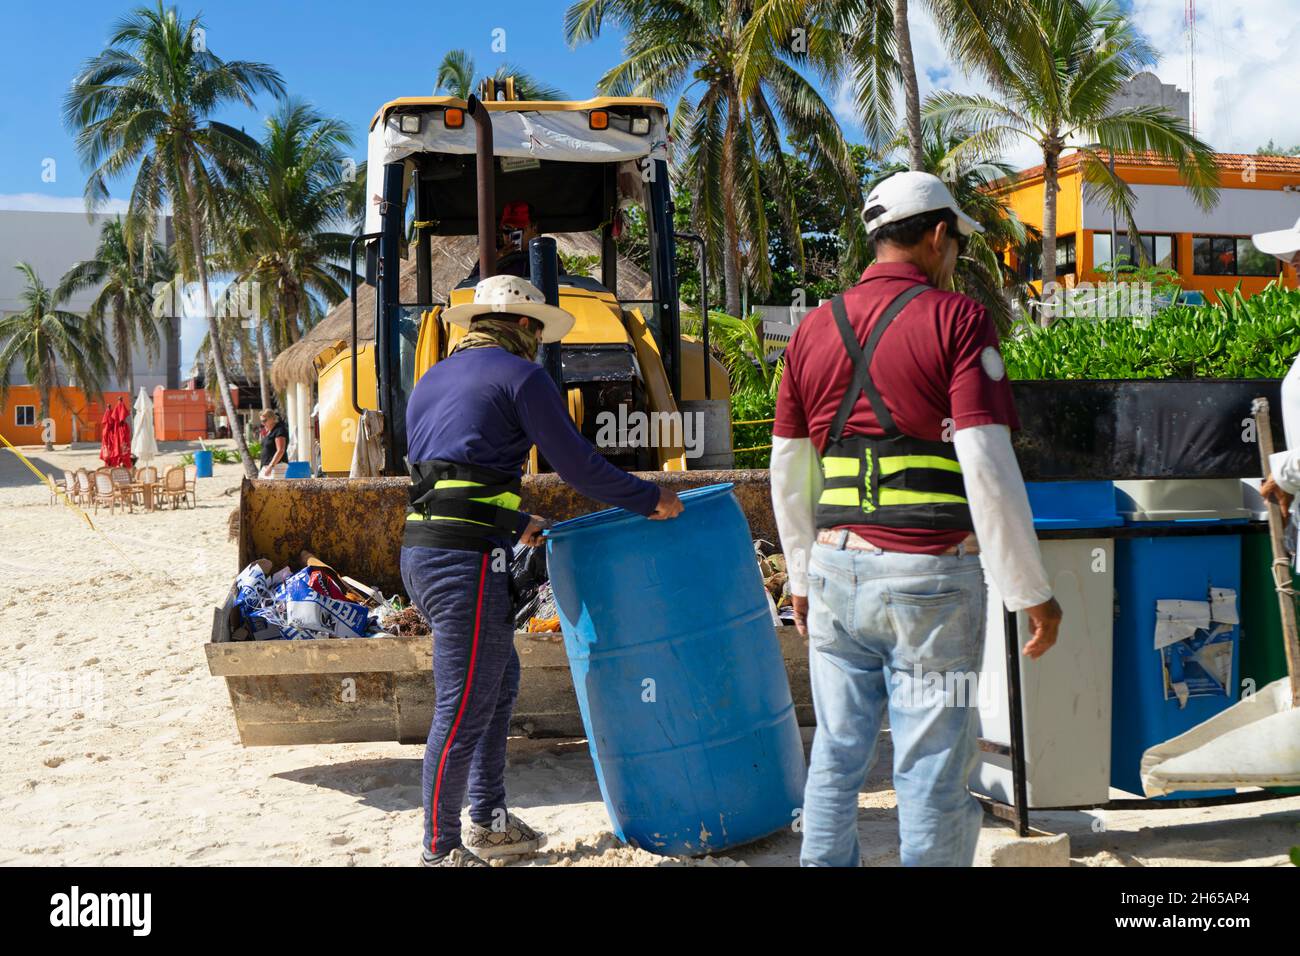 The garbage truck operator trash containers to keep the beach clean during the summer vacation season in Playa del Carmen, Mexico. Eco-tourism concept Stock Photo